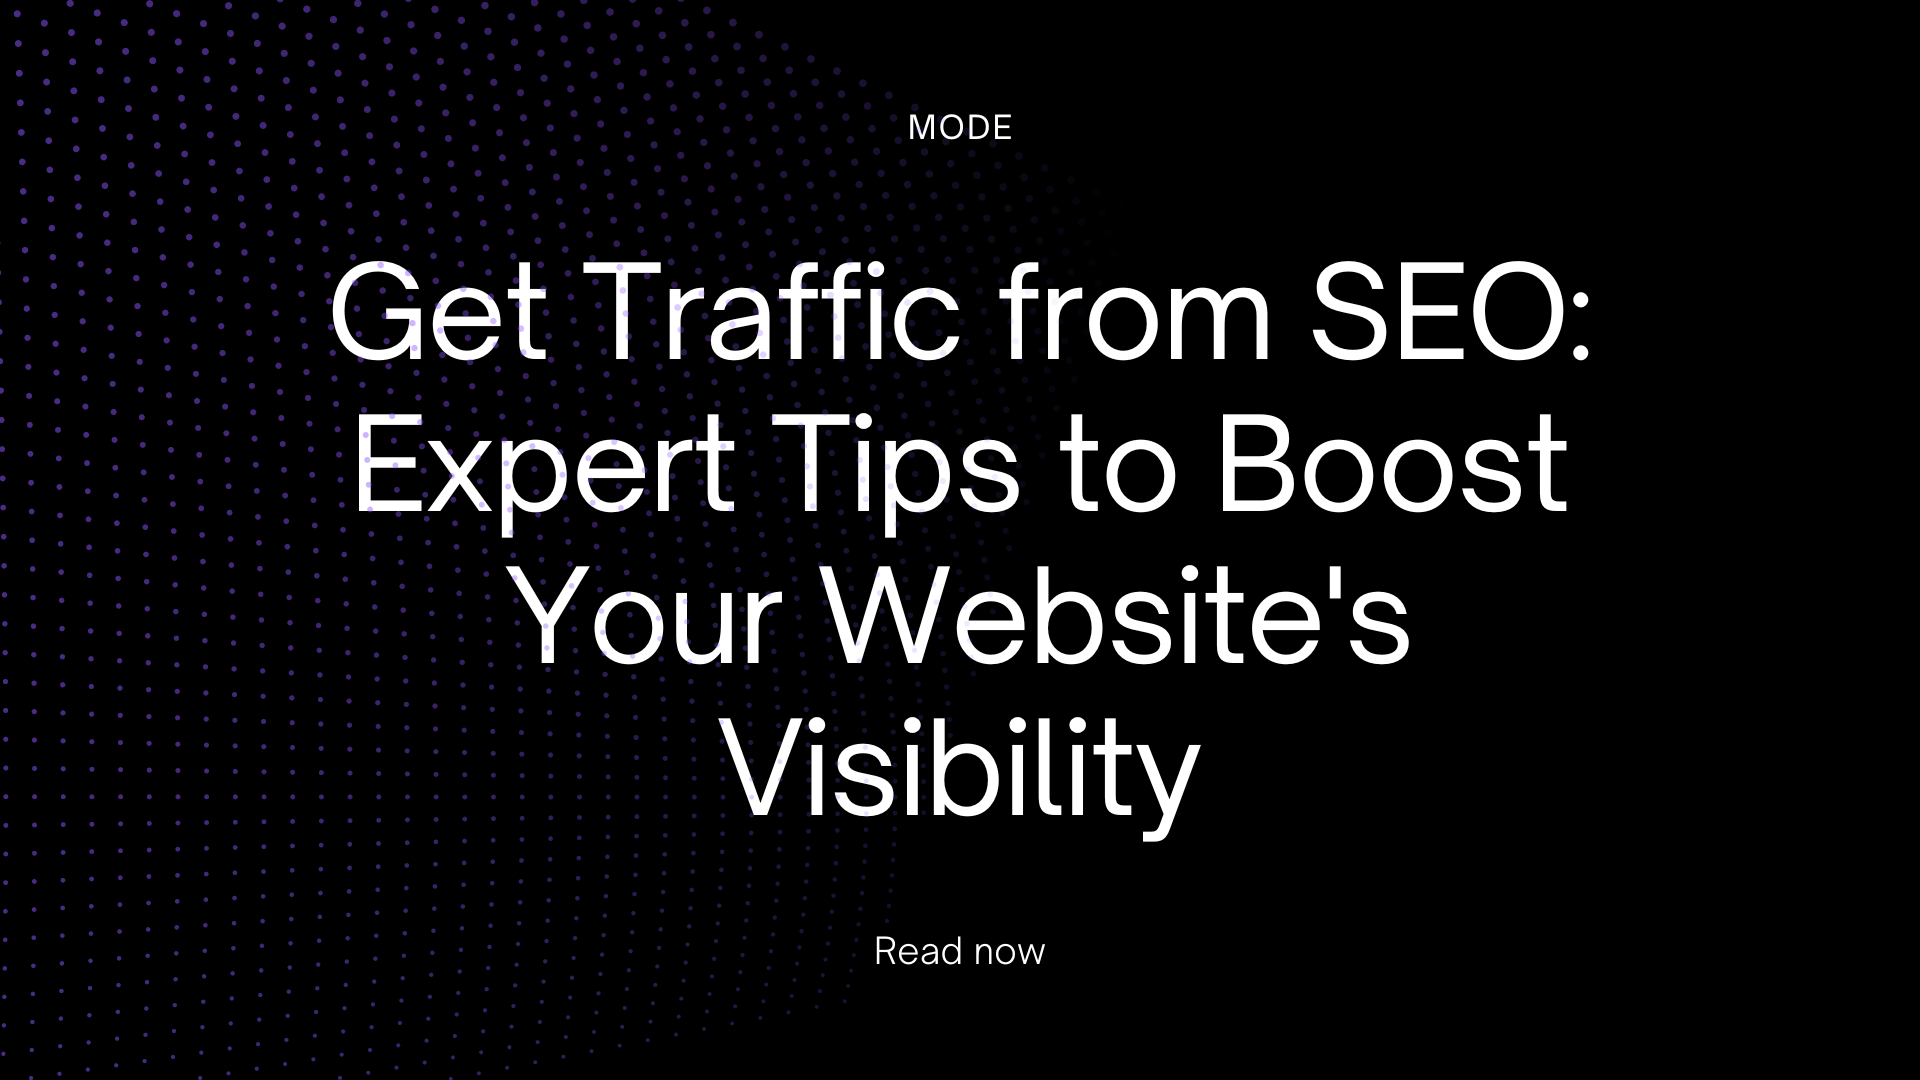 Get Traffic from SEO: Expert Tips to Boost Your Website's Visibility